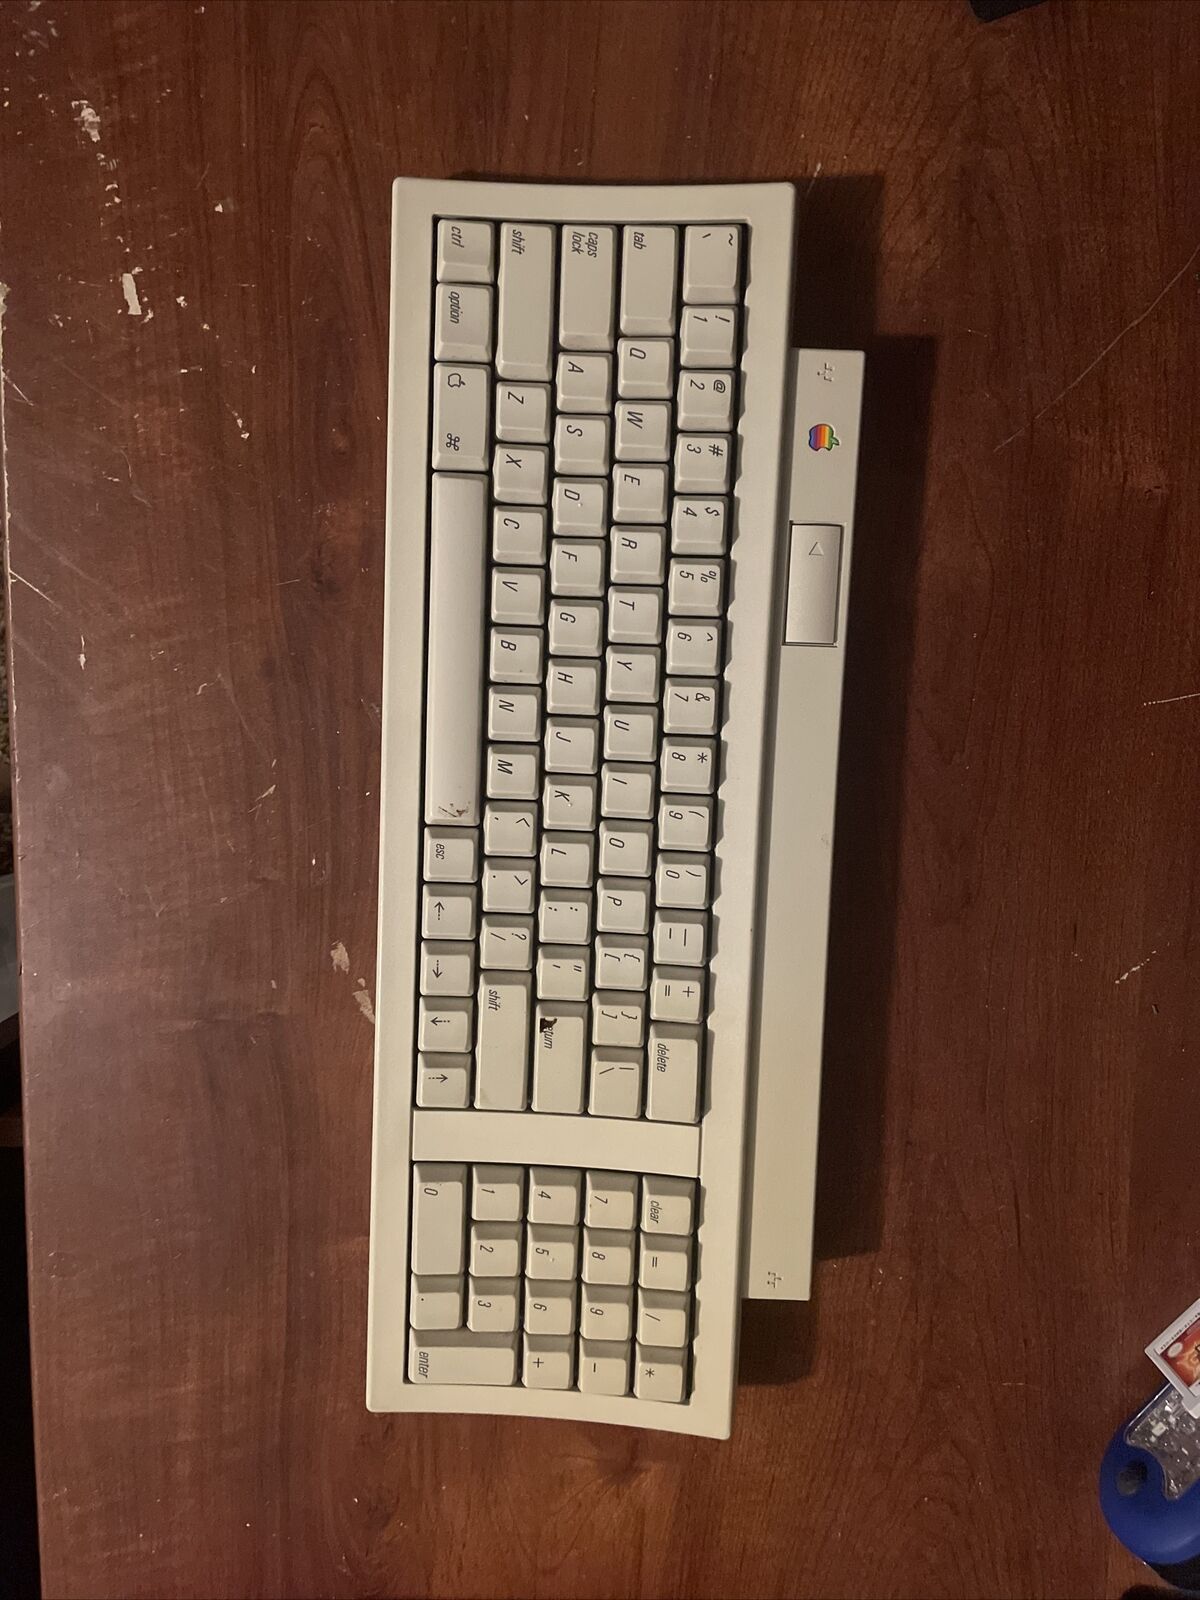 Vintage Apple Keyboard II M0487 Untested Decent Condition